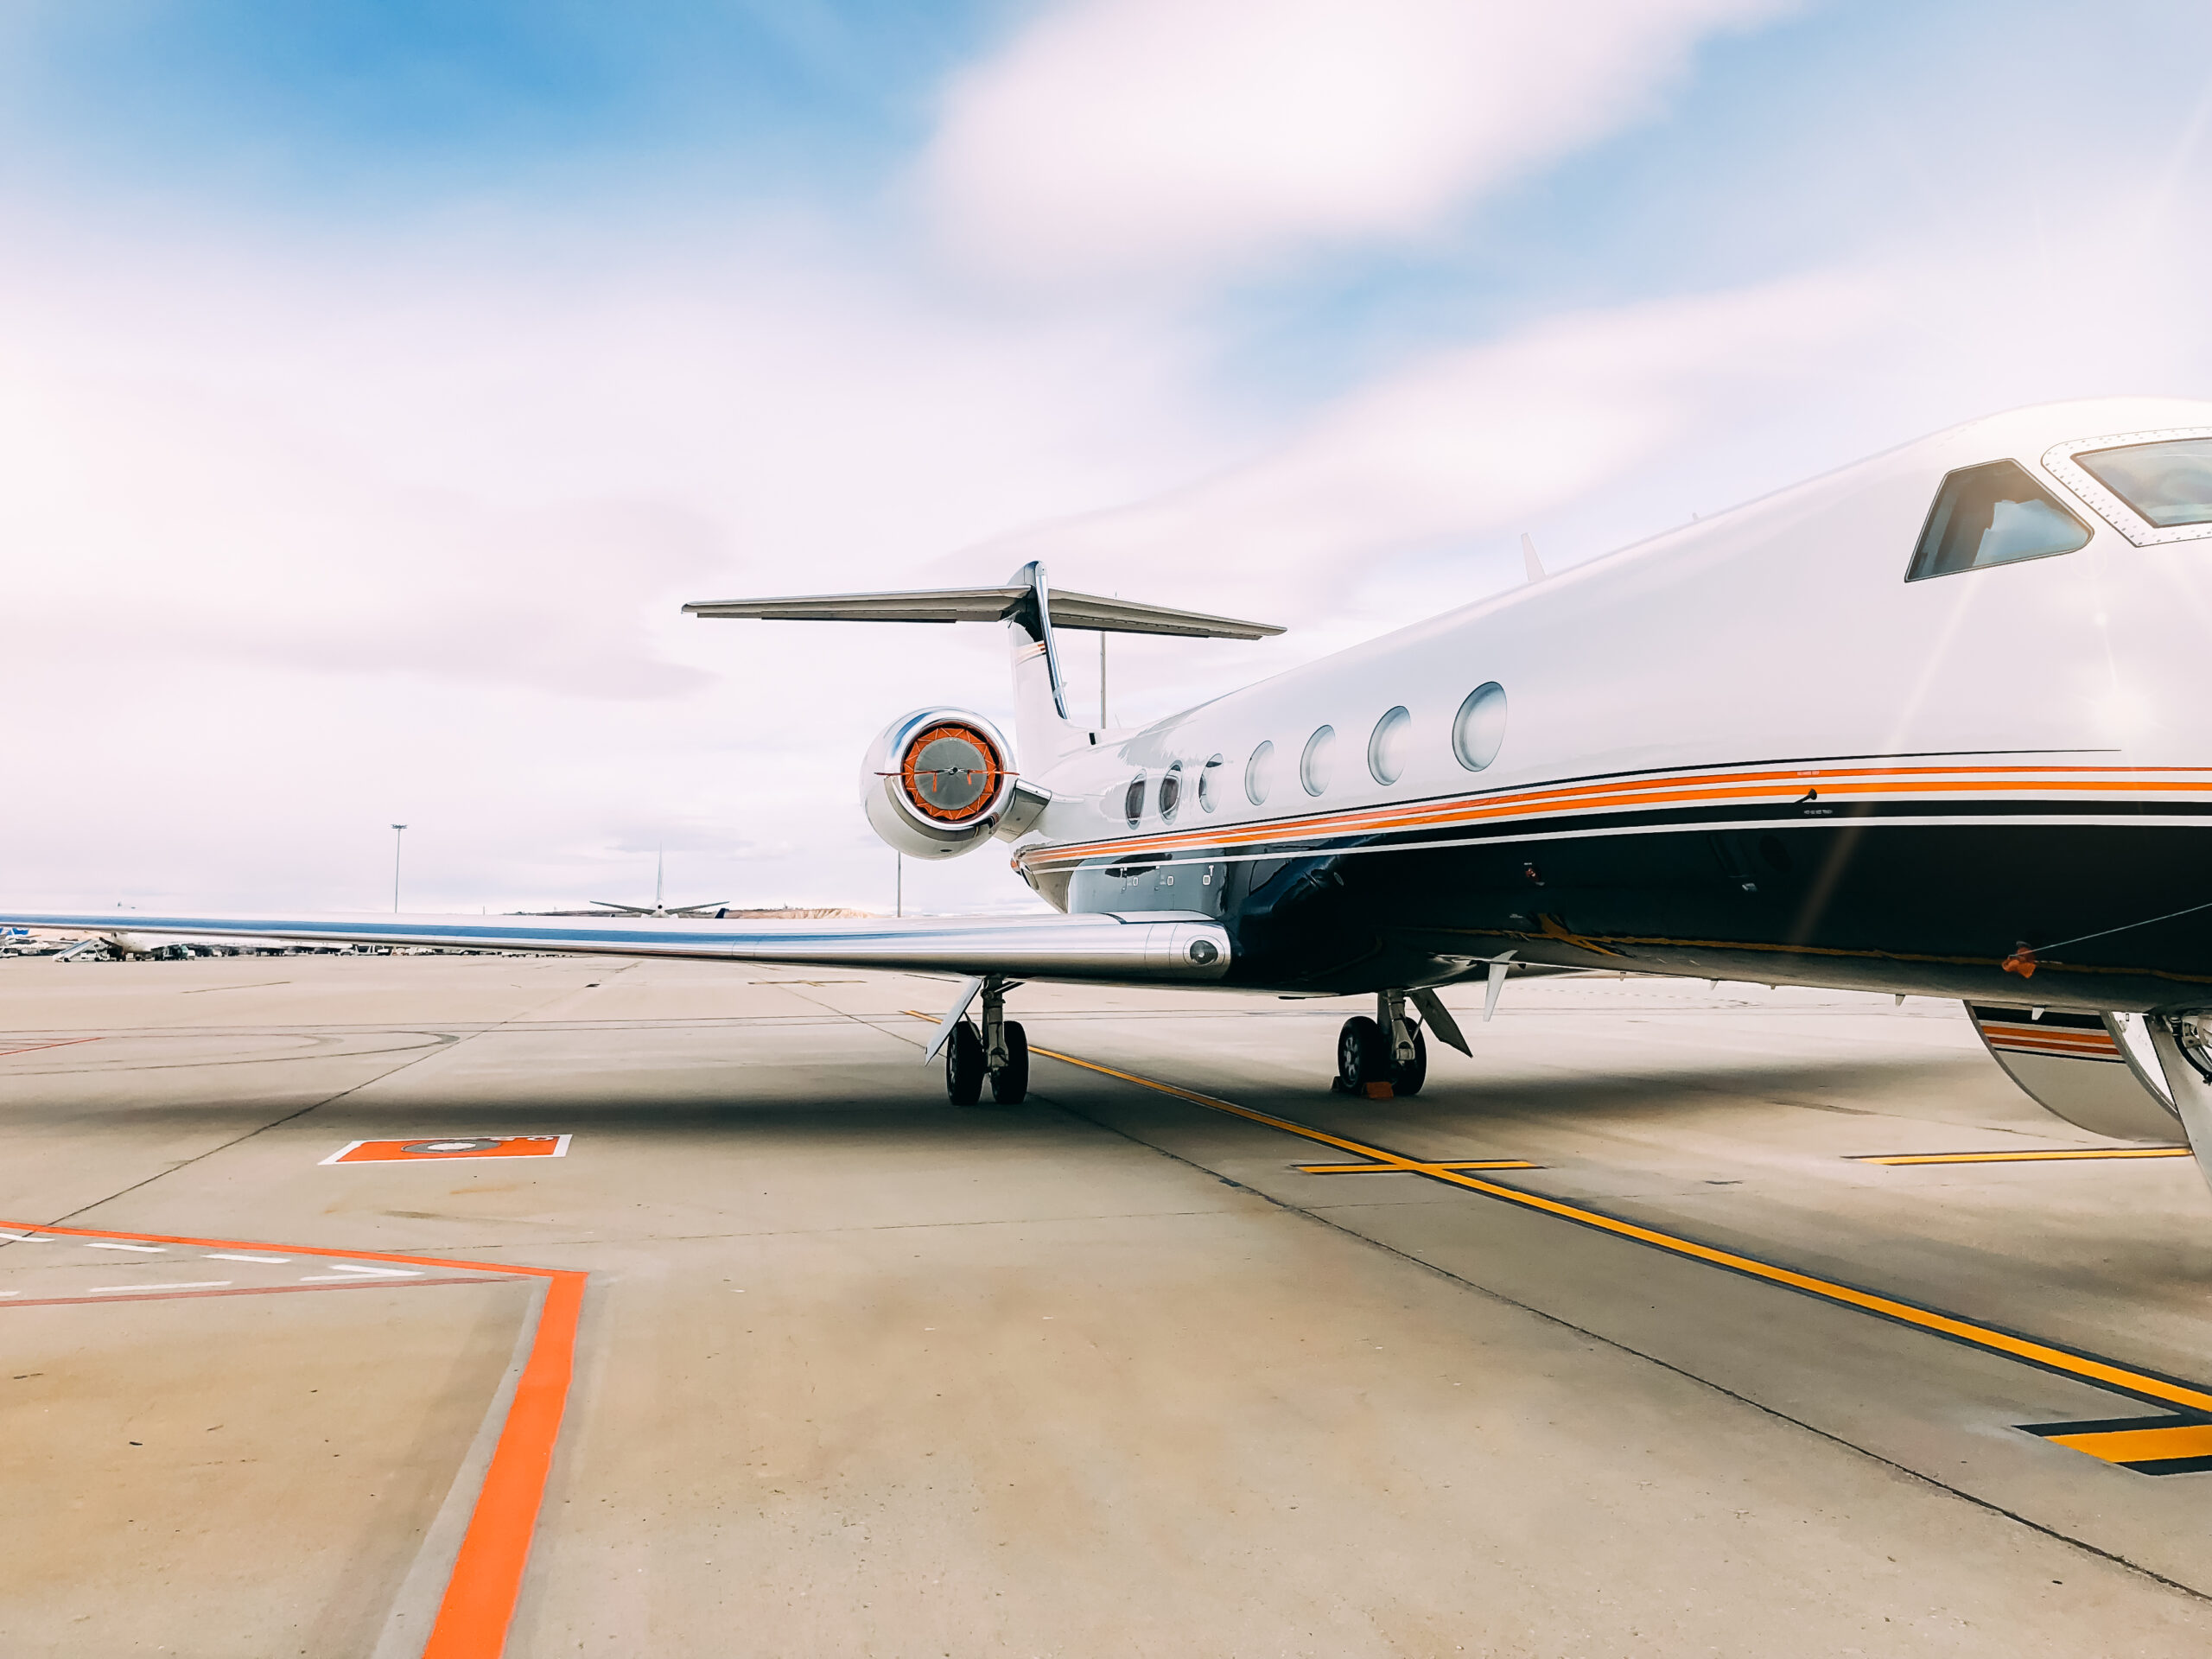 Private luxury jet at the airport terminal - Haulogis